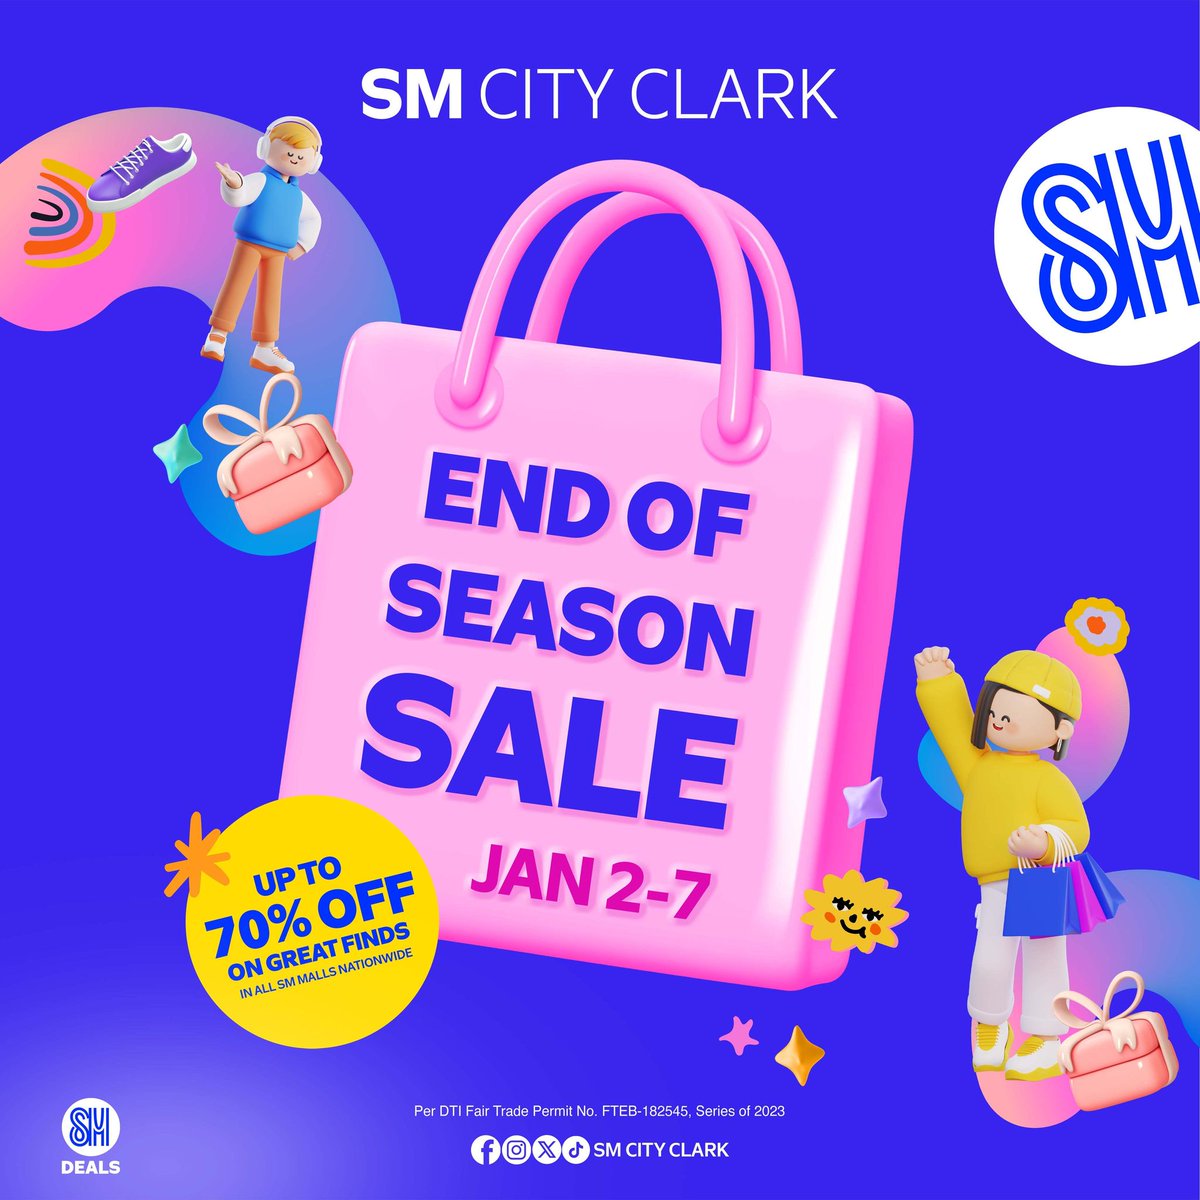 Just when you think the celebrations are over, #EndOfSeasonSaleAtSM is here once again! Get ready to enjoy up to 70% off on selected items from January 2-7! Start the year right and #ExperienceTogetherAtSM a sale that will definitely make your year AWESOME! 💙🫂